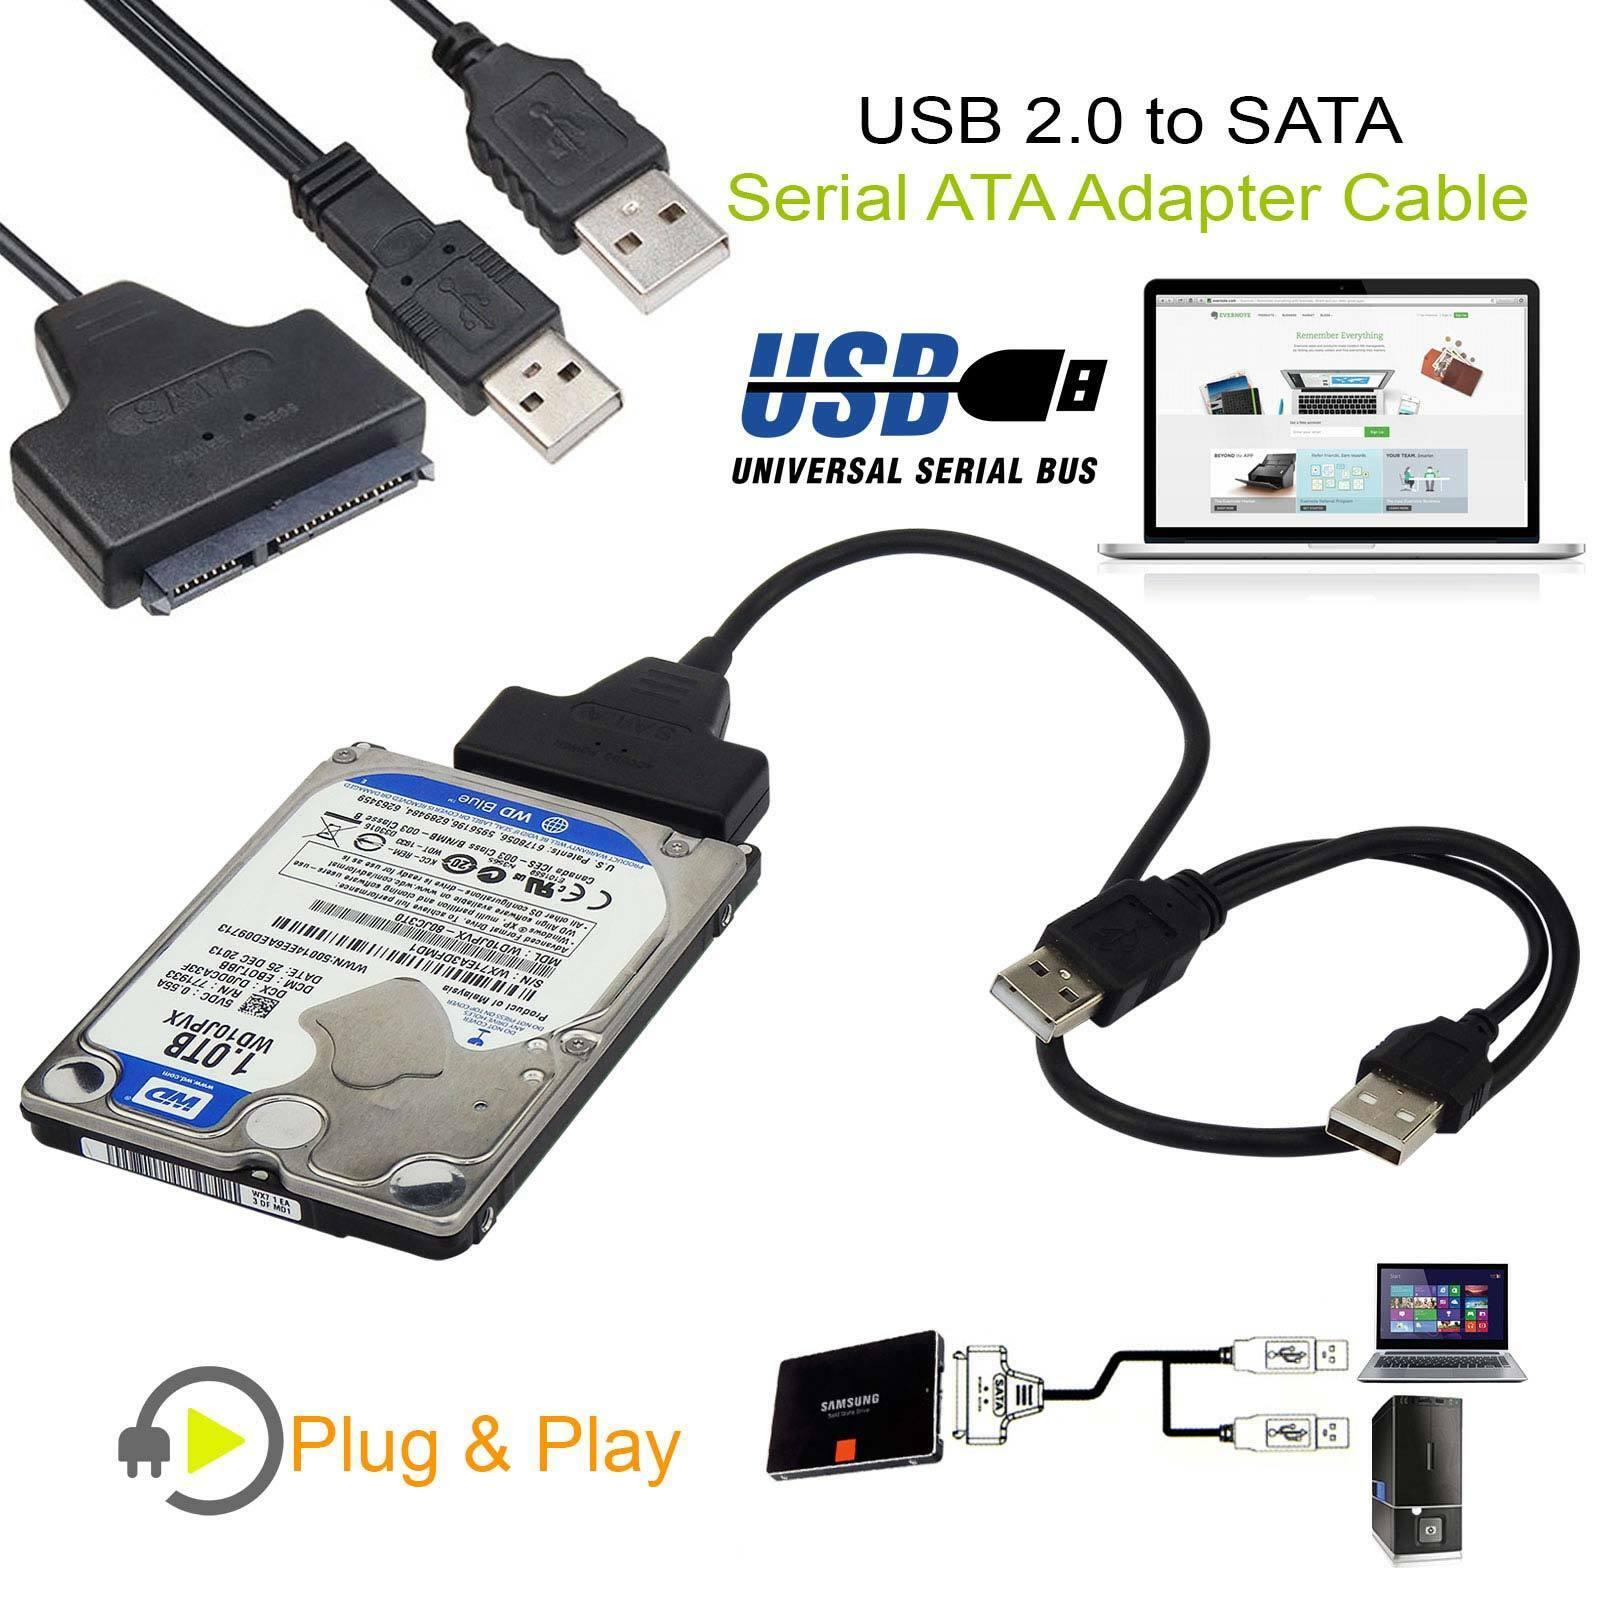 USB 2.0 To SATA 2.5″ Adapter Cable Reader for External SSD Hard Disk Drive